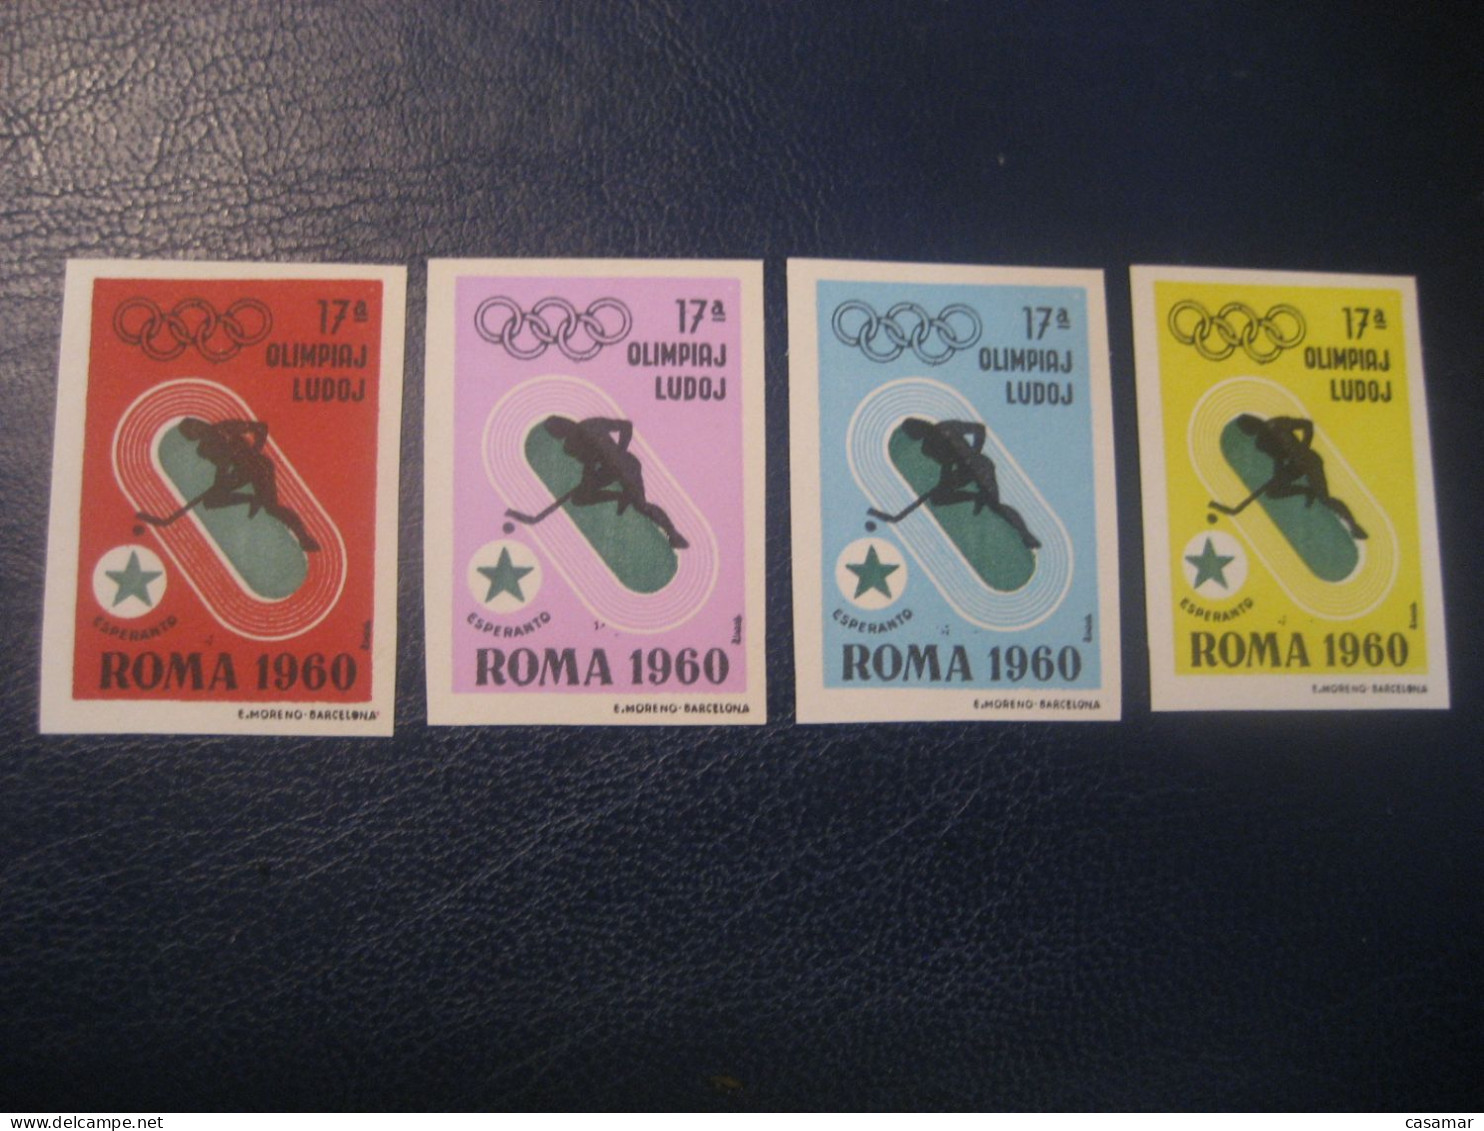 ROMA 1960 Ice Hockey Sur Glace Olympic Games Olympics Esperanto 4 Imperforated Poster Stamp Vignette ITALY Spain Label - Hockey (sur Glace)